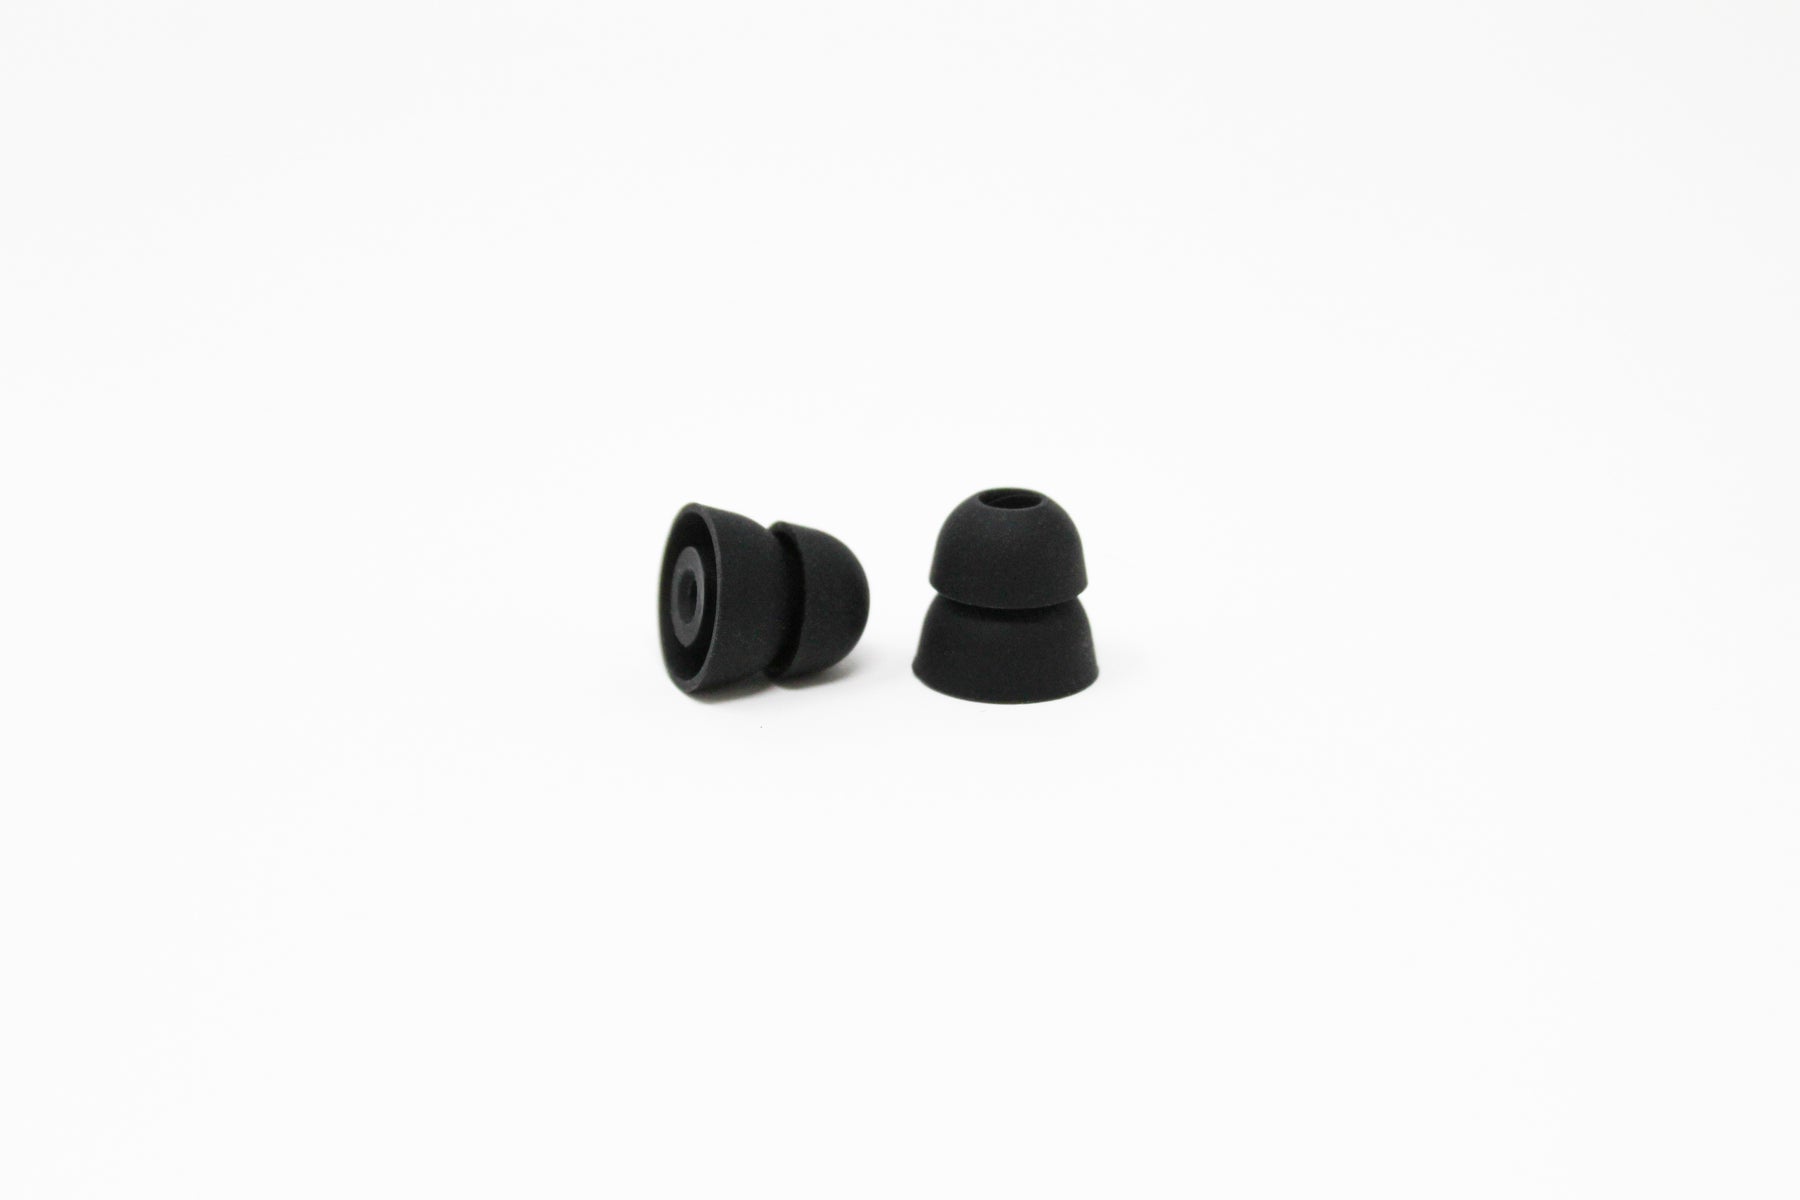 ISOtunes Small Double Flange Replacement Eartips